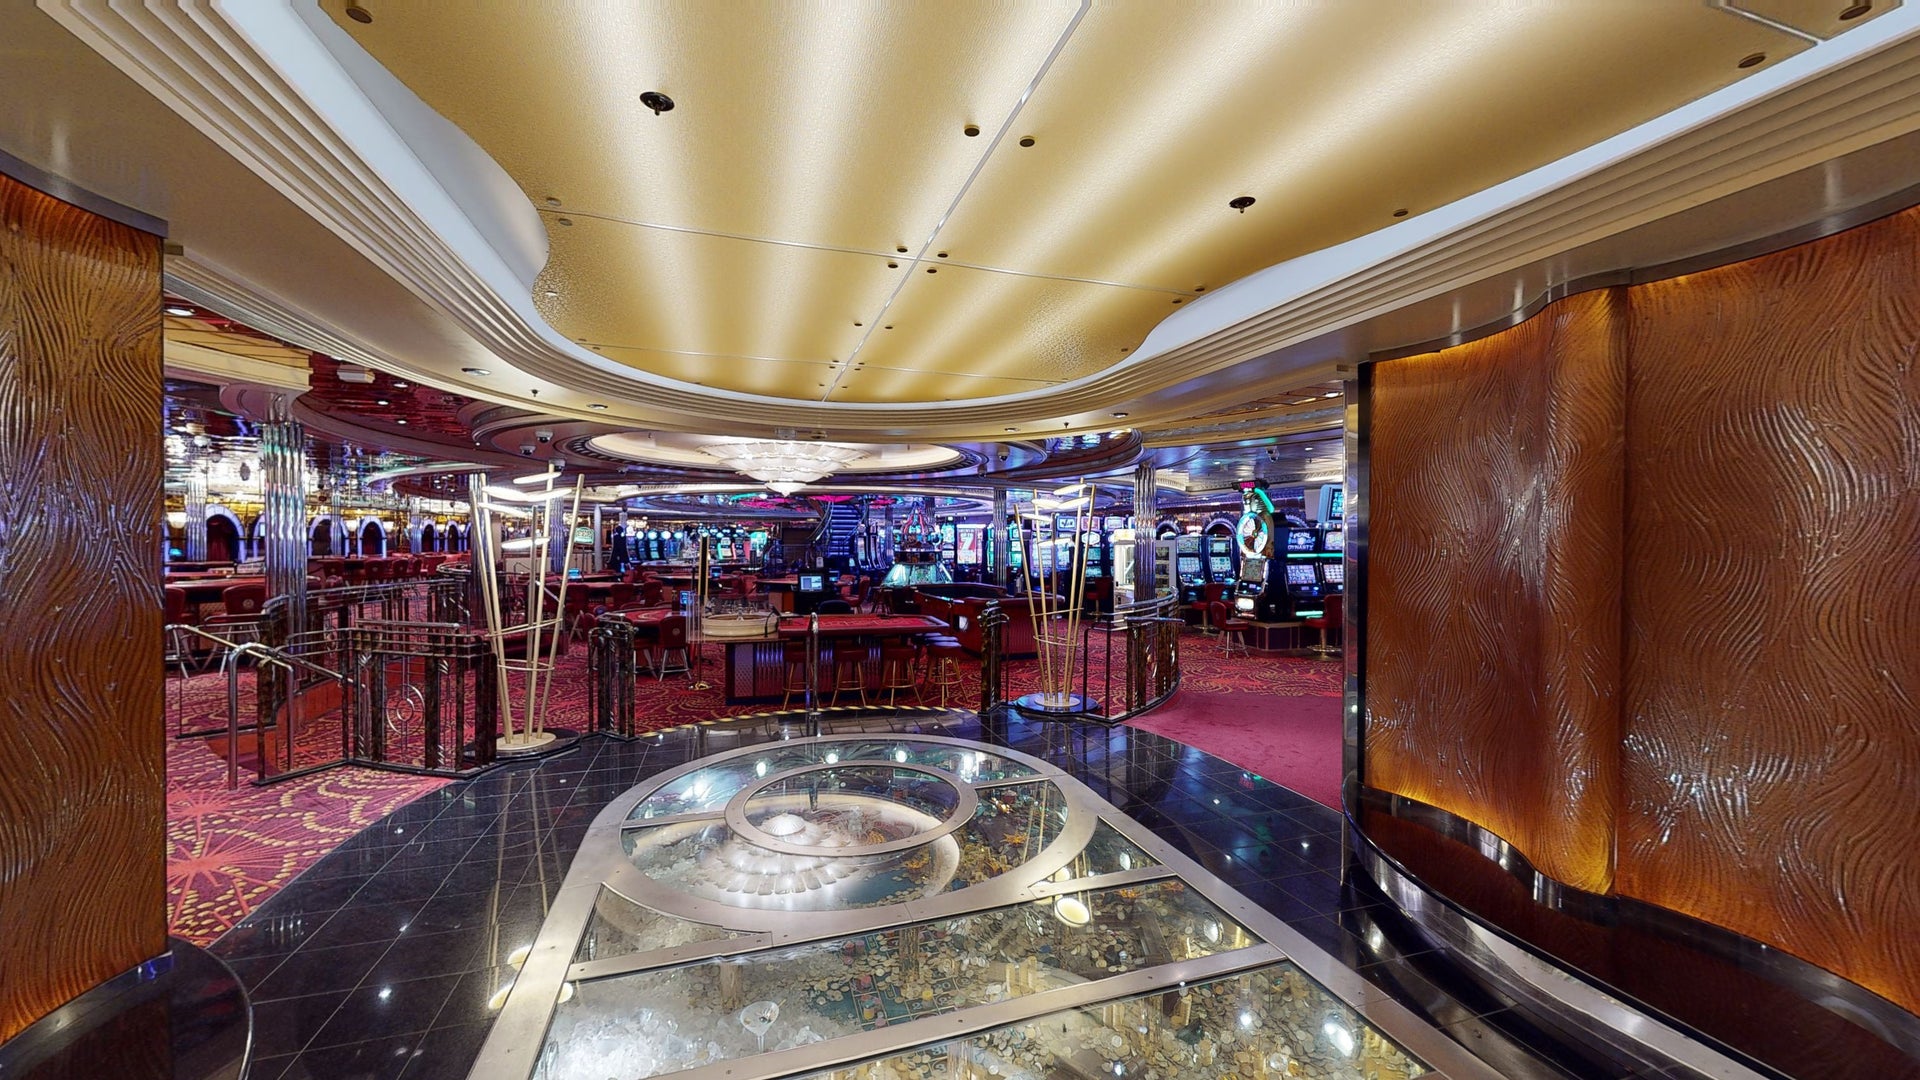 Beautiful Architecture Inside the Royal Caribbean Liberty of the